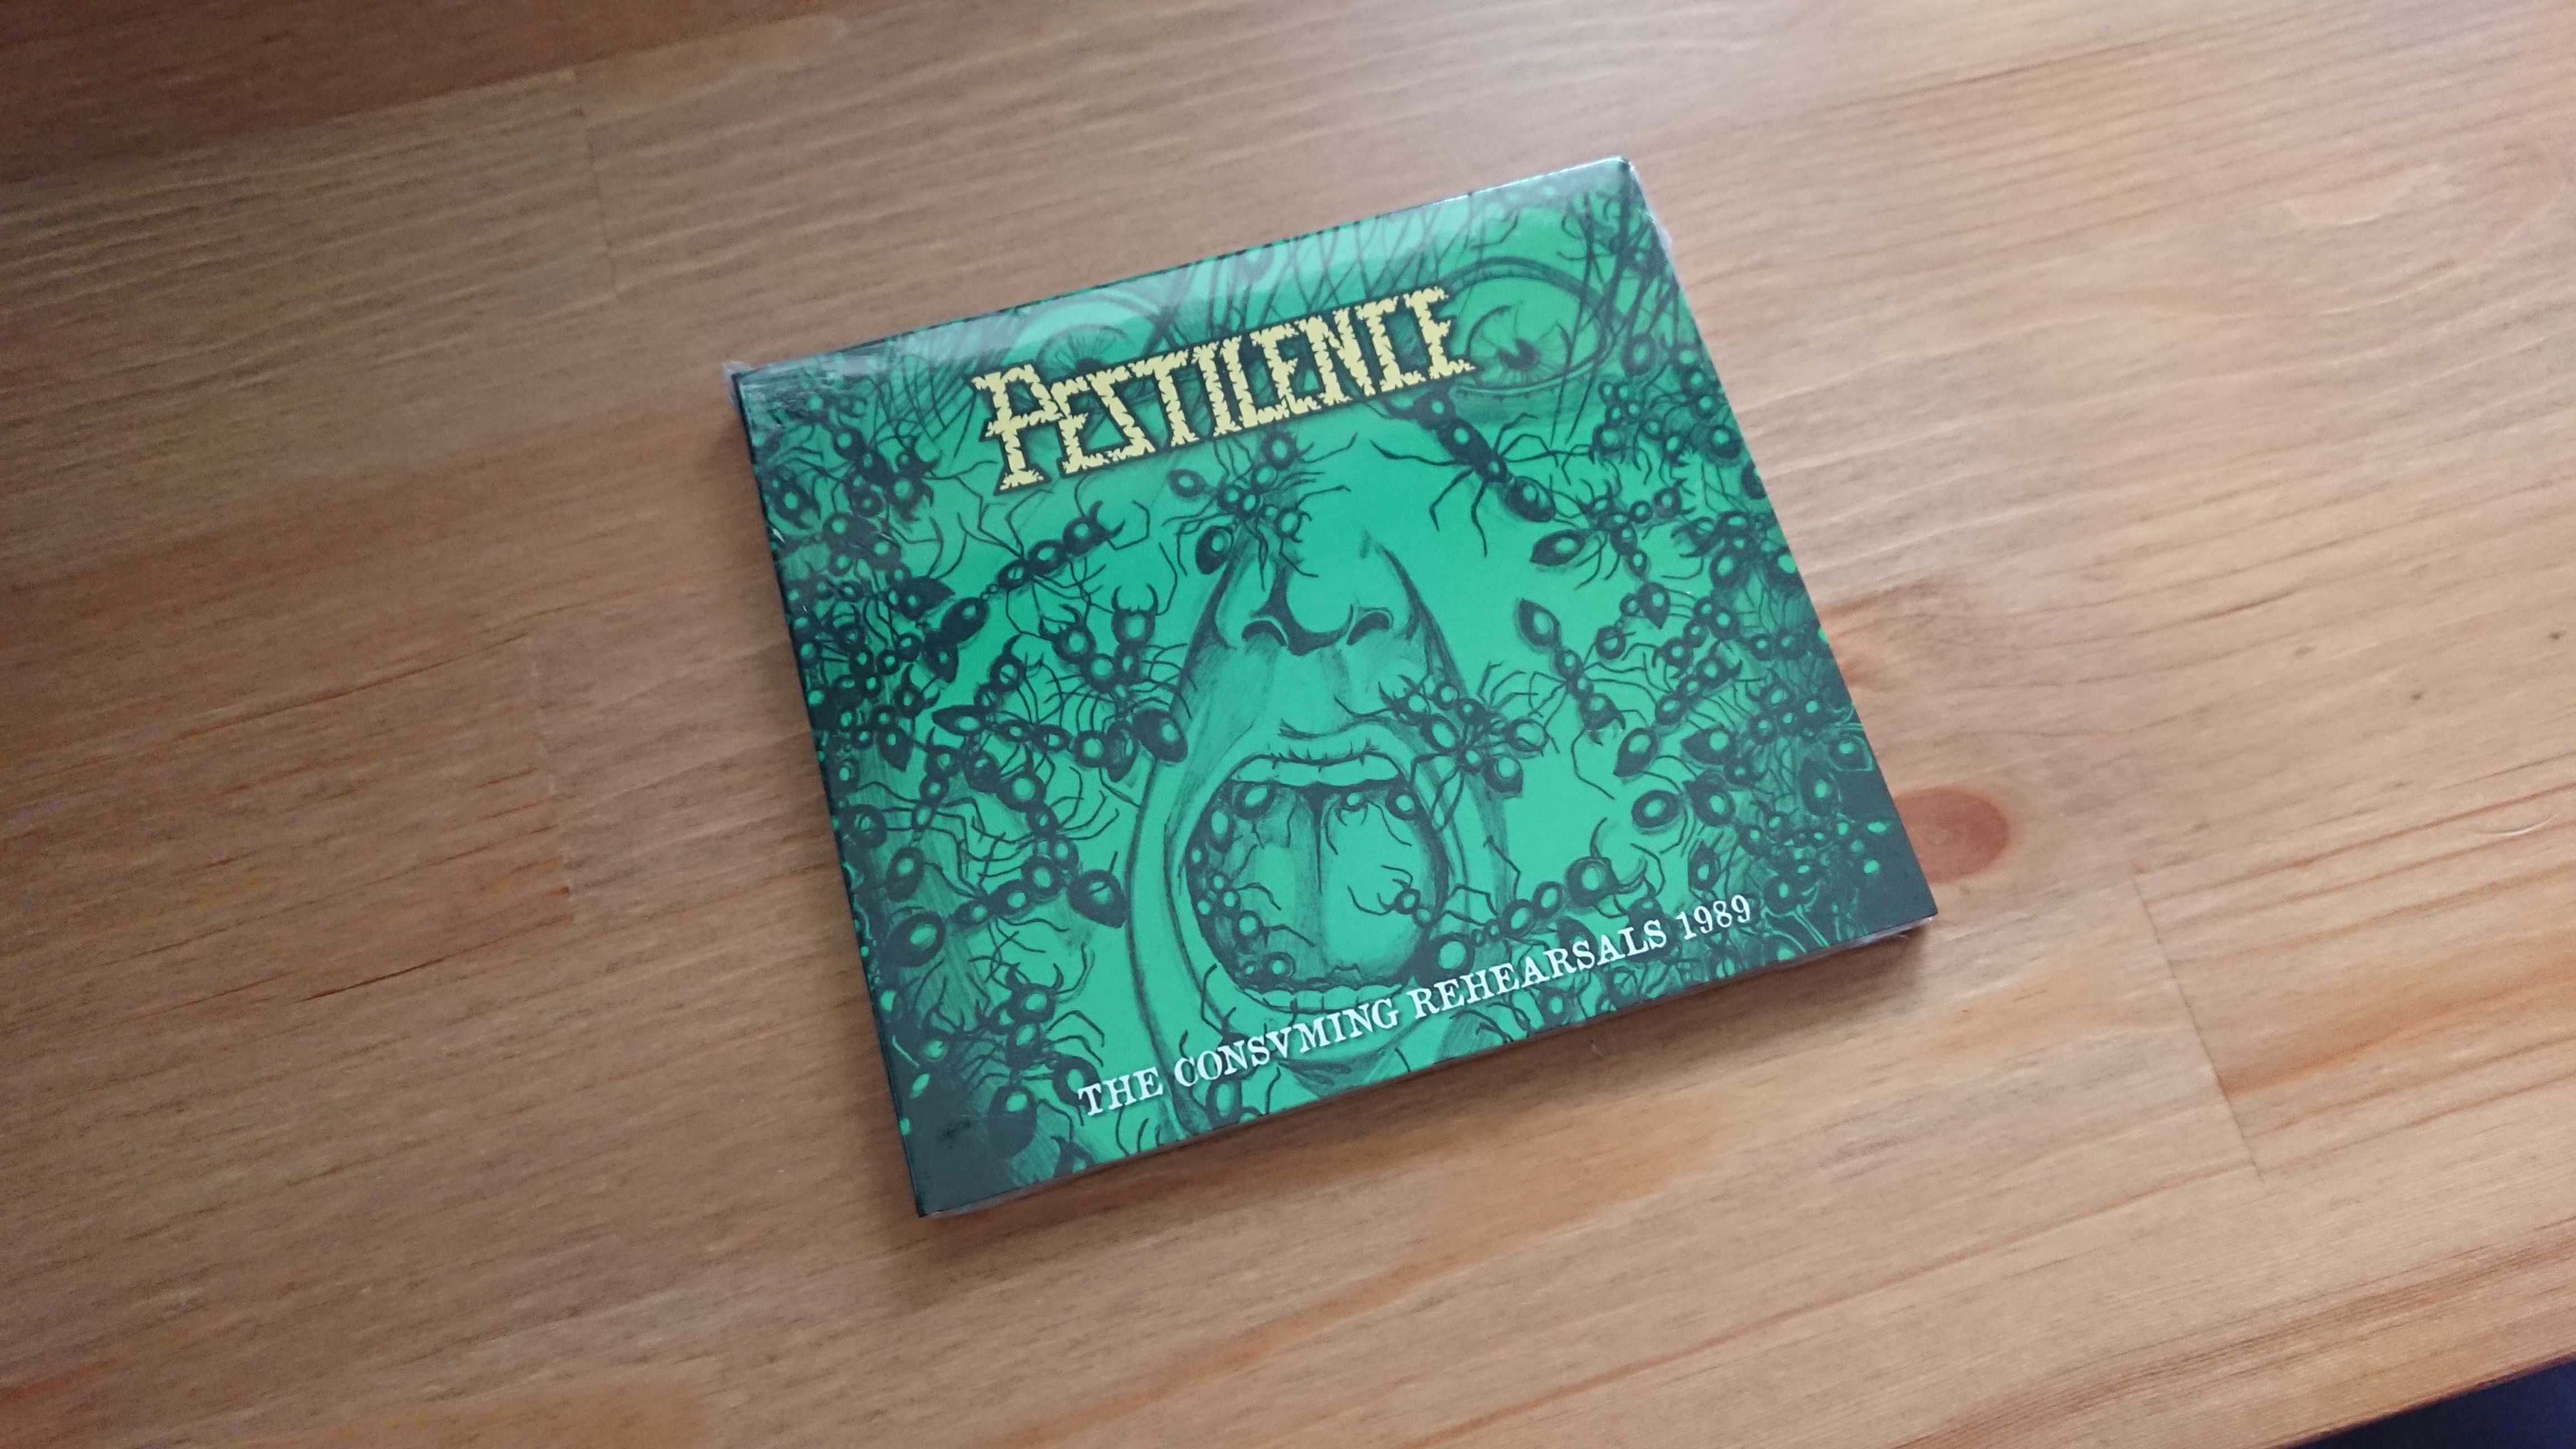 Pestilence The Consuming Rehearsals 1989 CD *NOWA* 2019 Limited 500